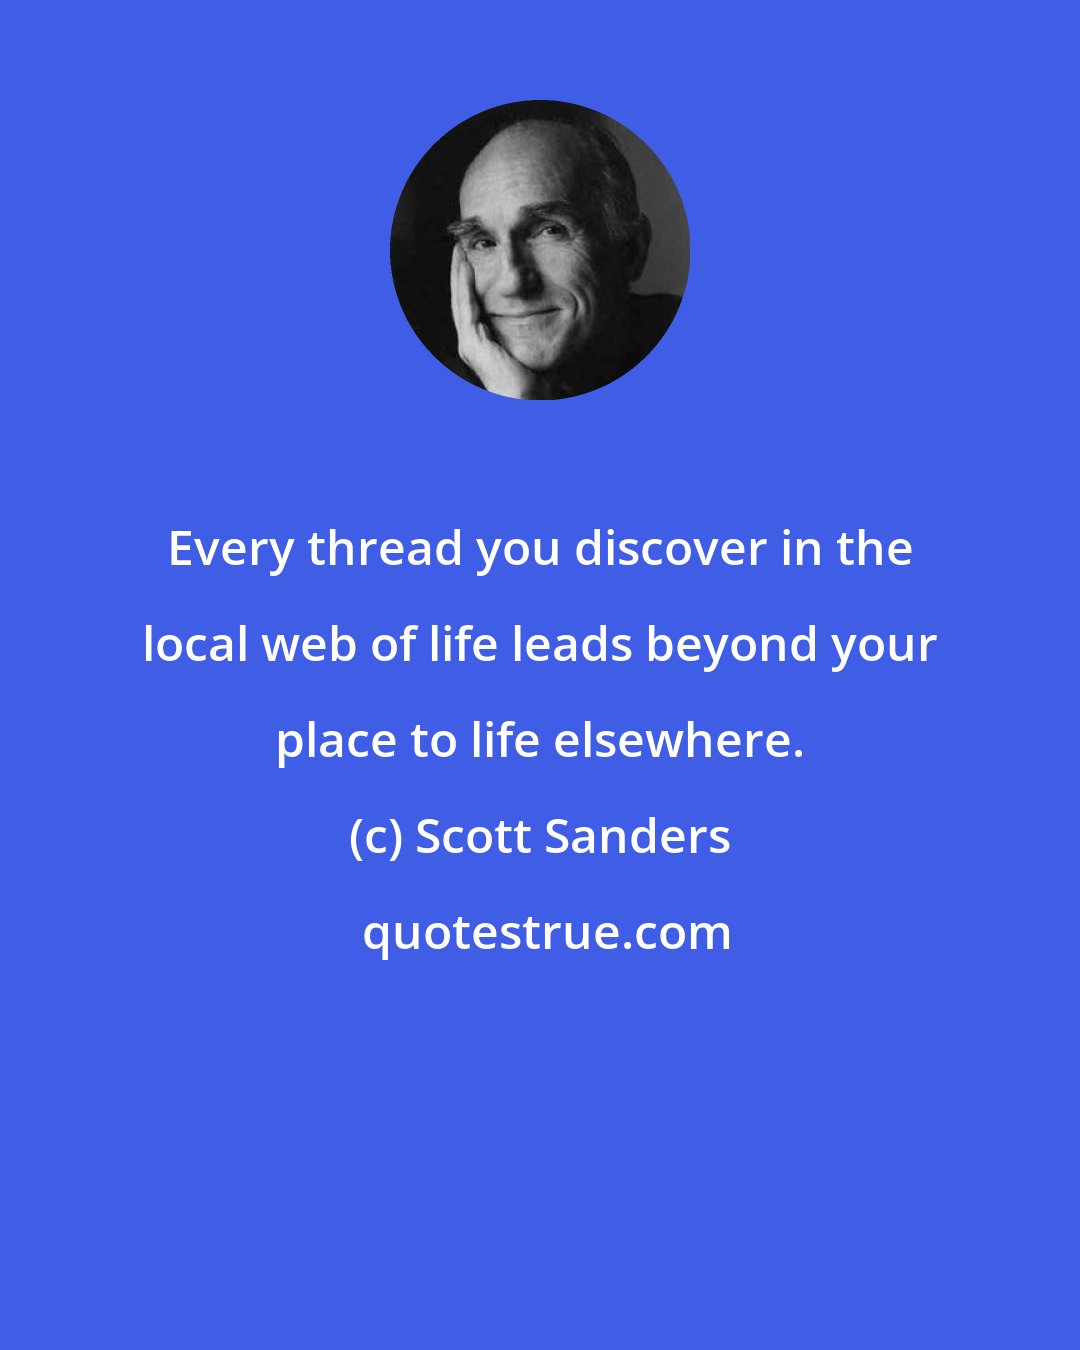 Scott Sanders: Every thread you discover in the local web of life leads beyond your place to life elsewhere.